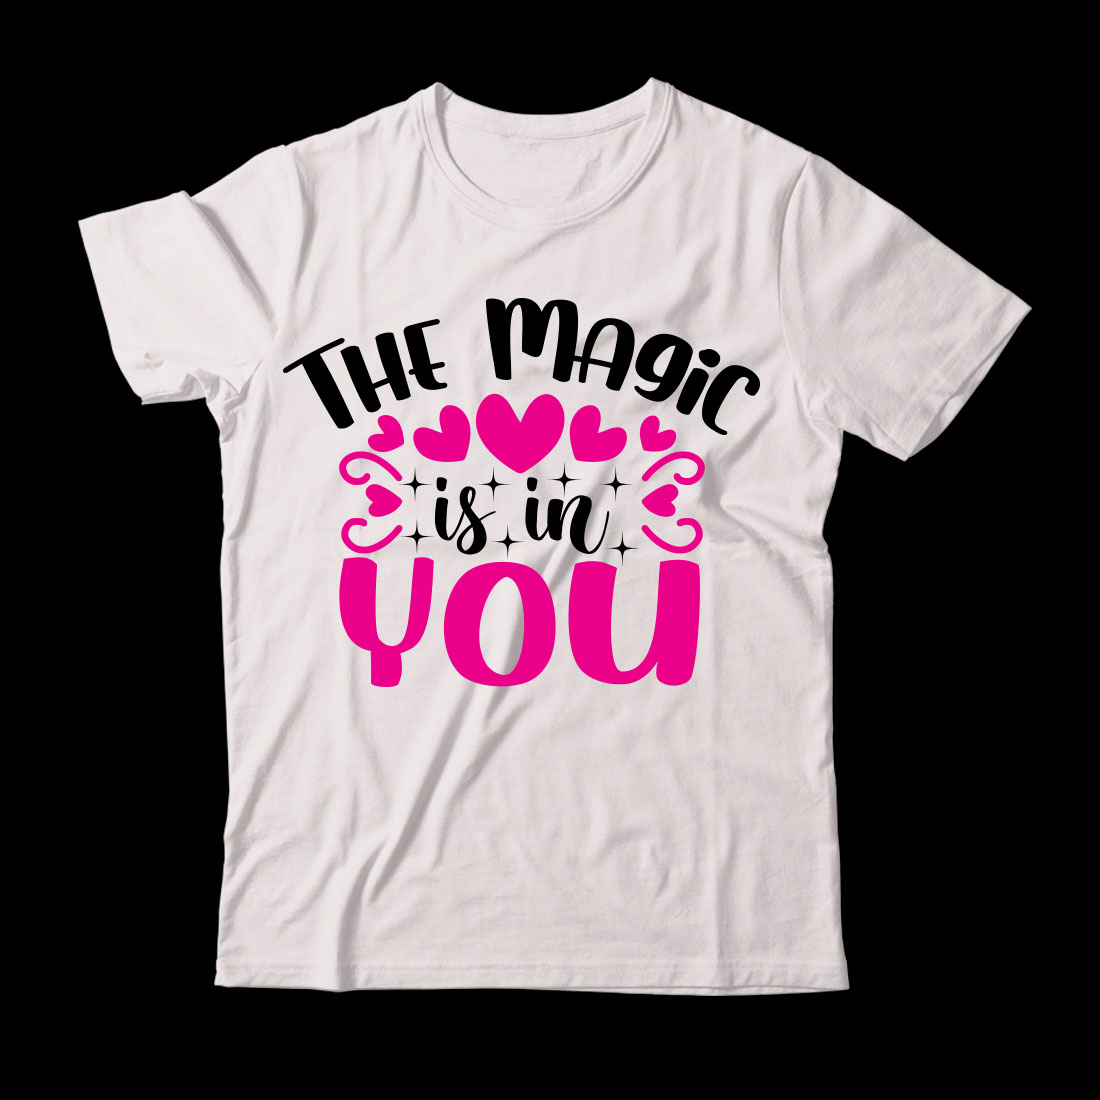 The magic is in you t - shirt.